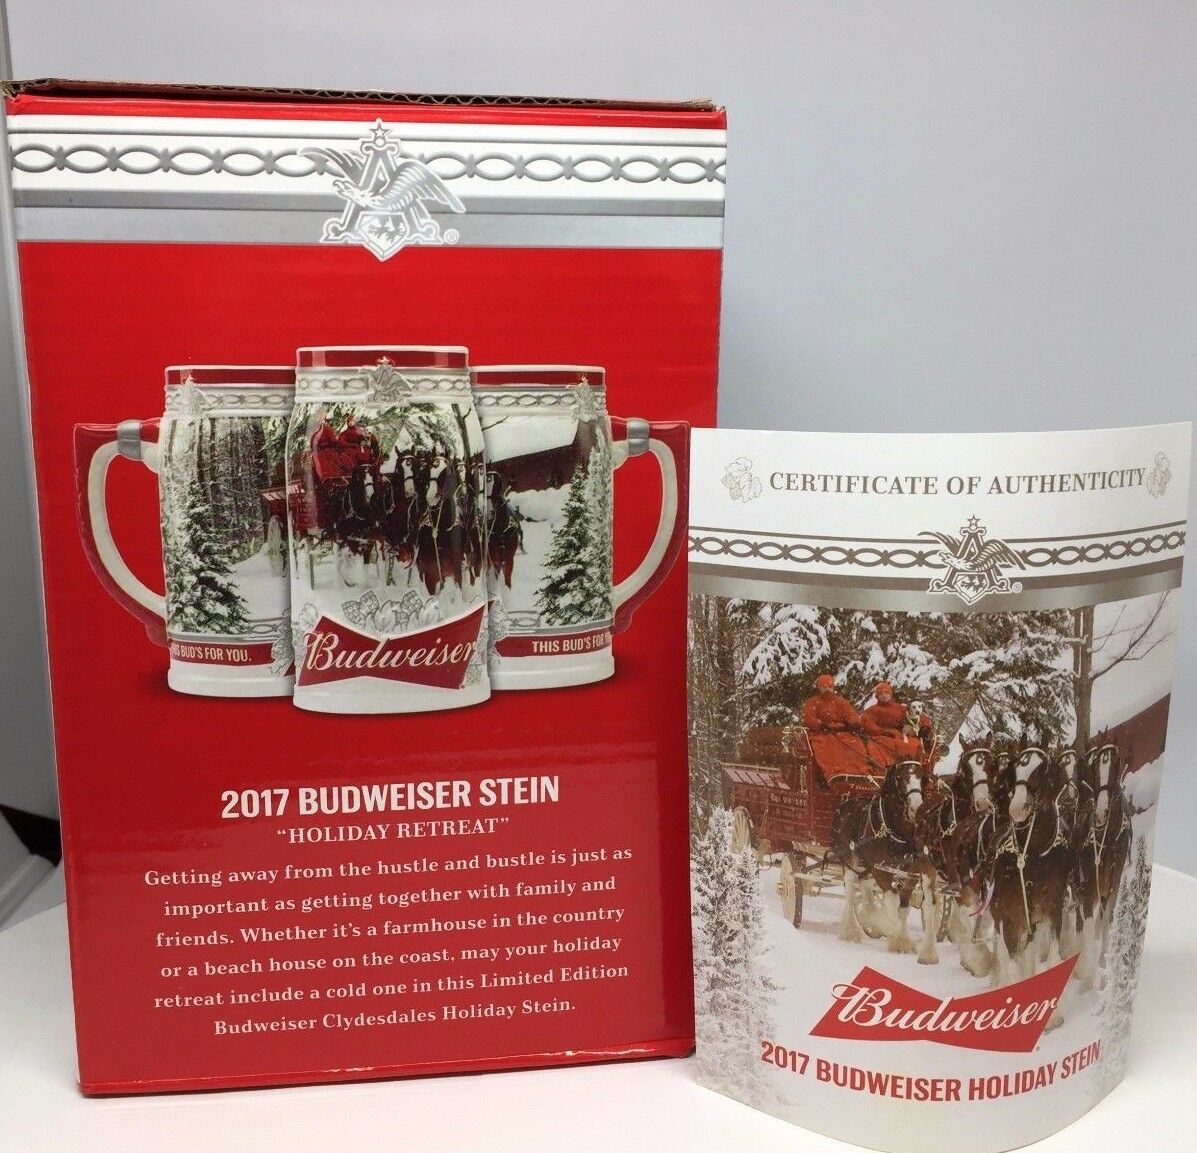 2017 Budweiser Holiday Stein Christmas Beer Mug From Annual Series